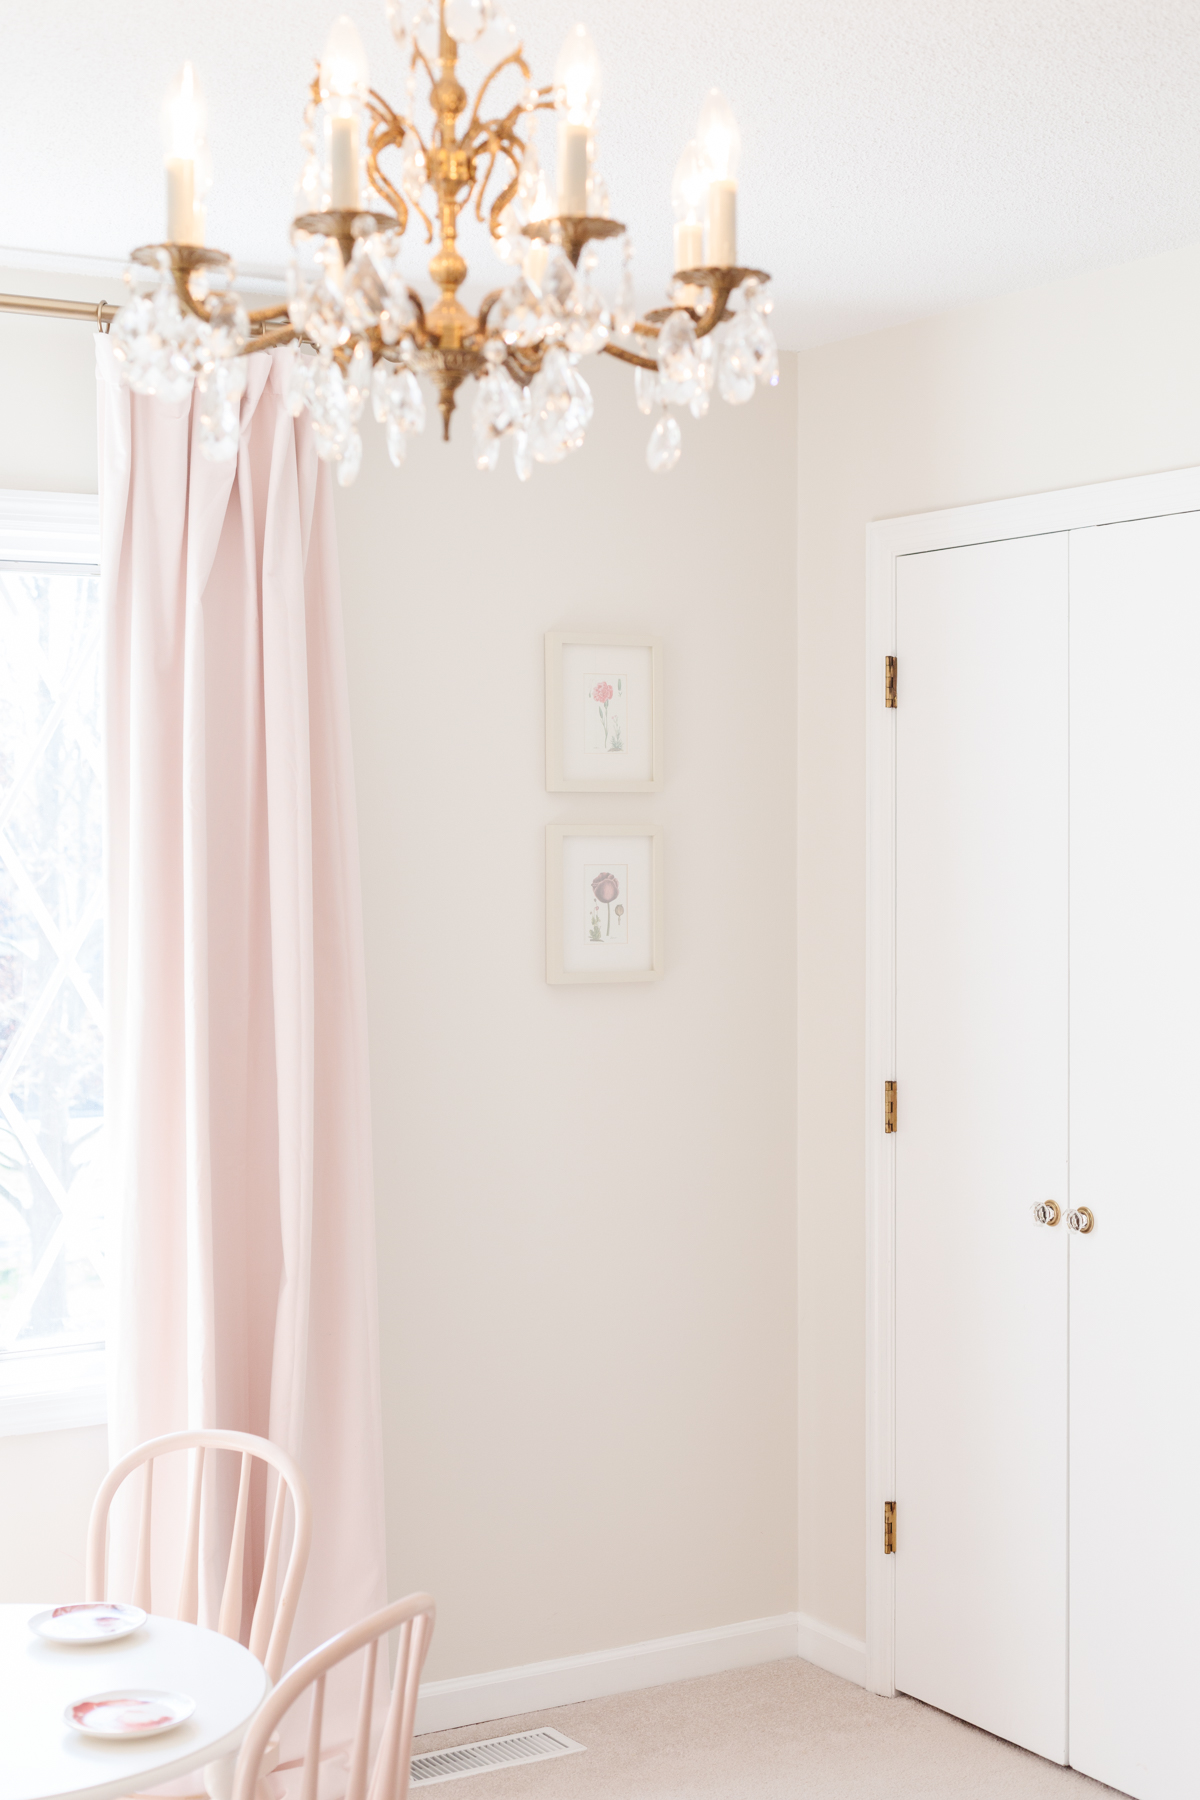 A pink dining room with an eggshell painted chandelier.